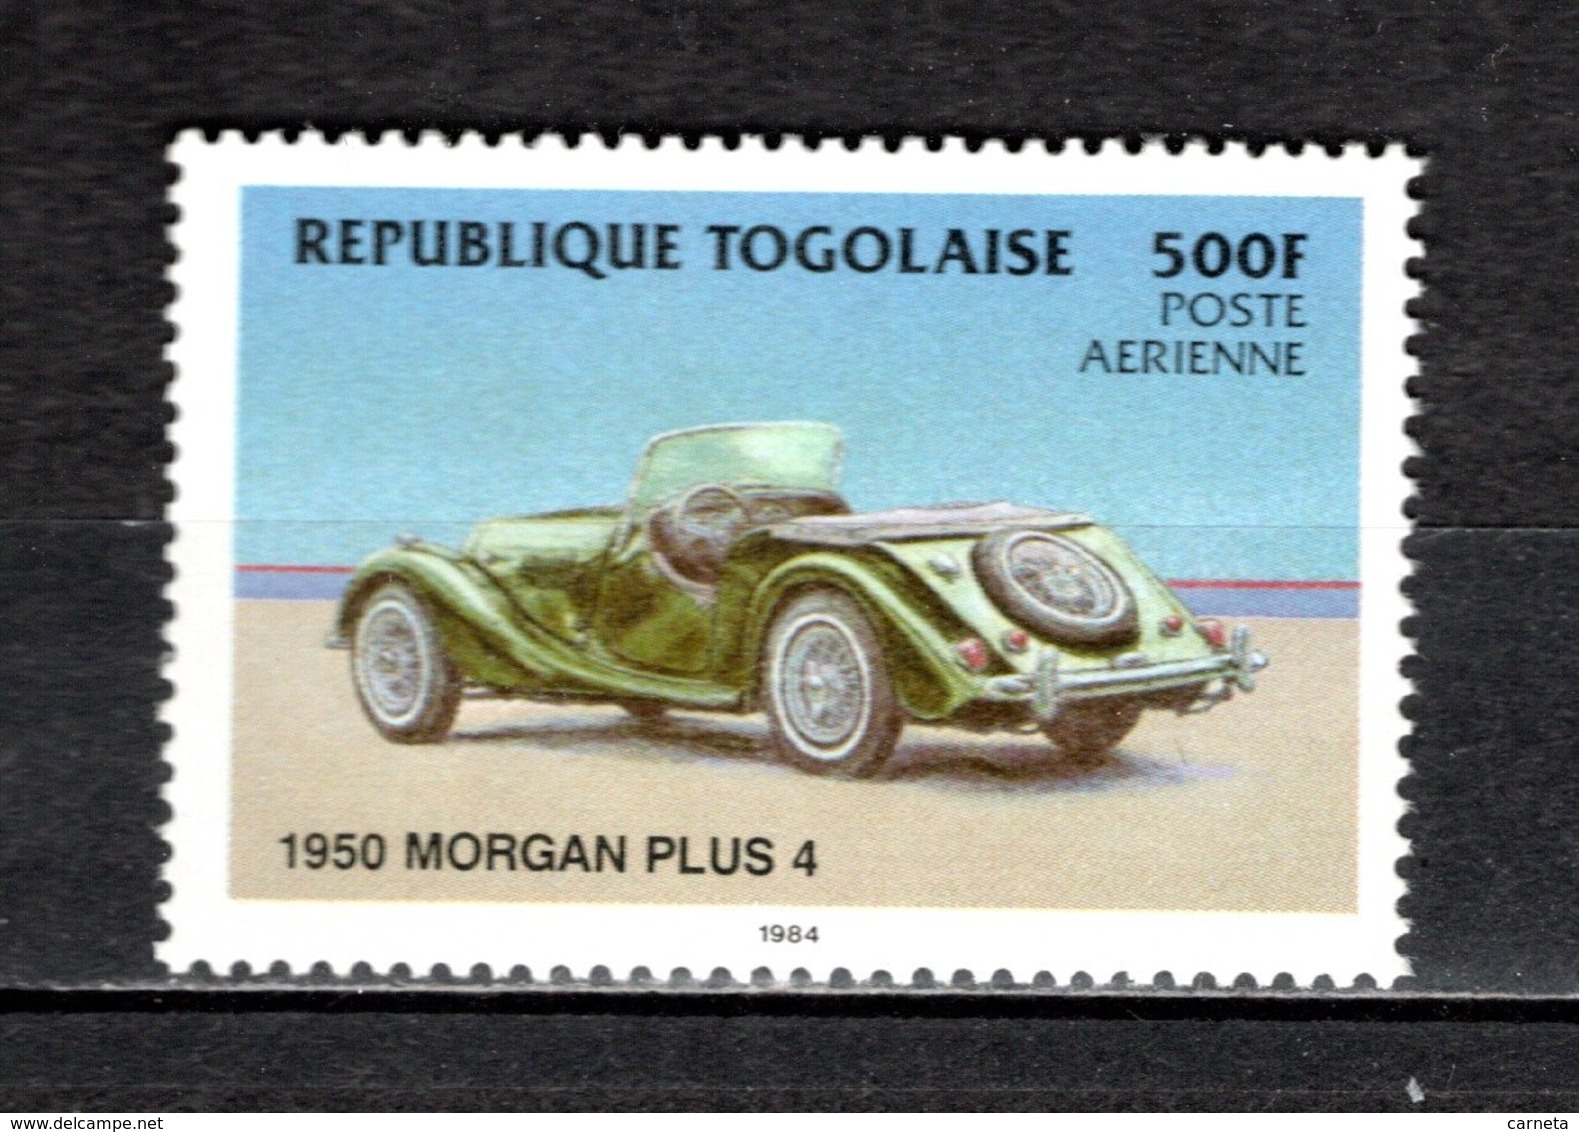 TOGO N° PA 525 NEUF SANS CHARNIERE COTE  8.70€  VOITURES  AUTOMOBILE ANCIENNE - Togo (1960-...)